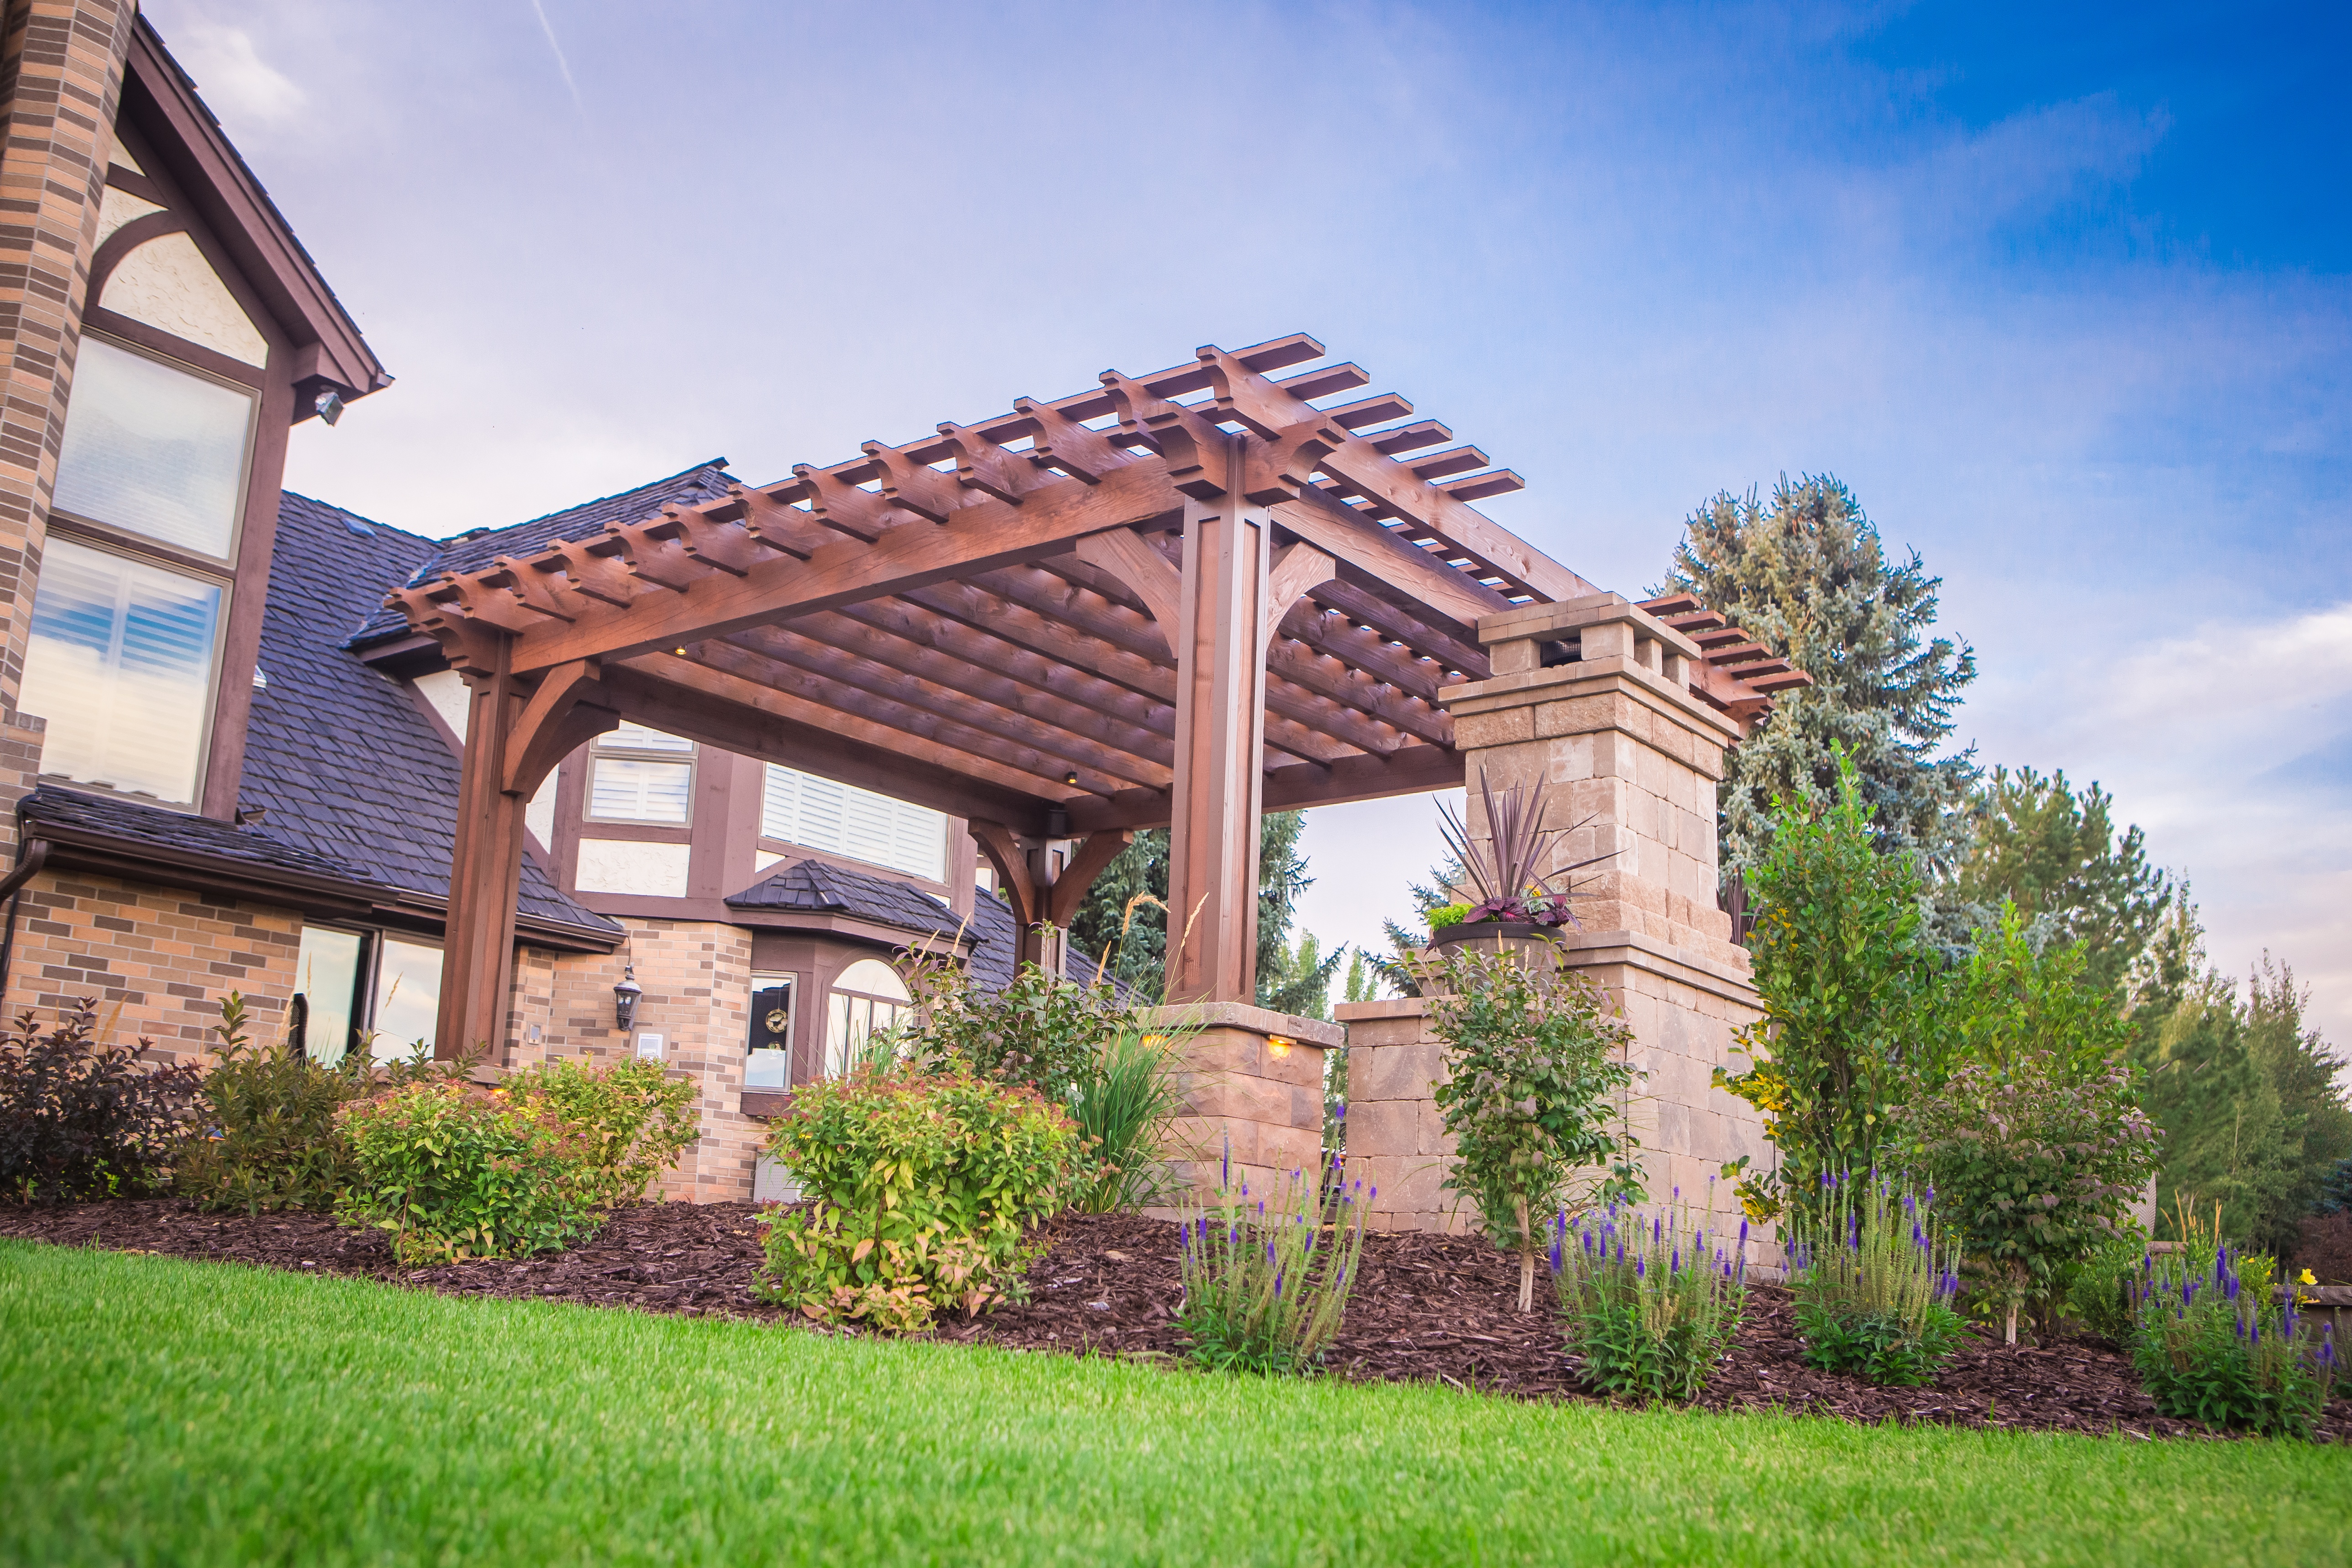 pergola with plantings and fireplace